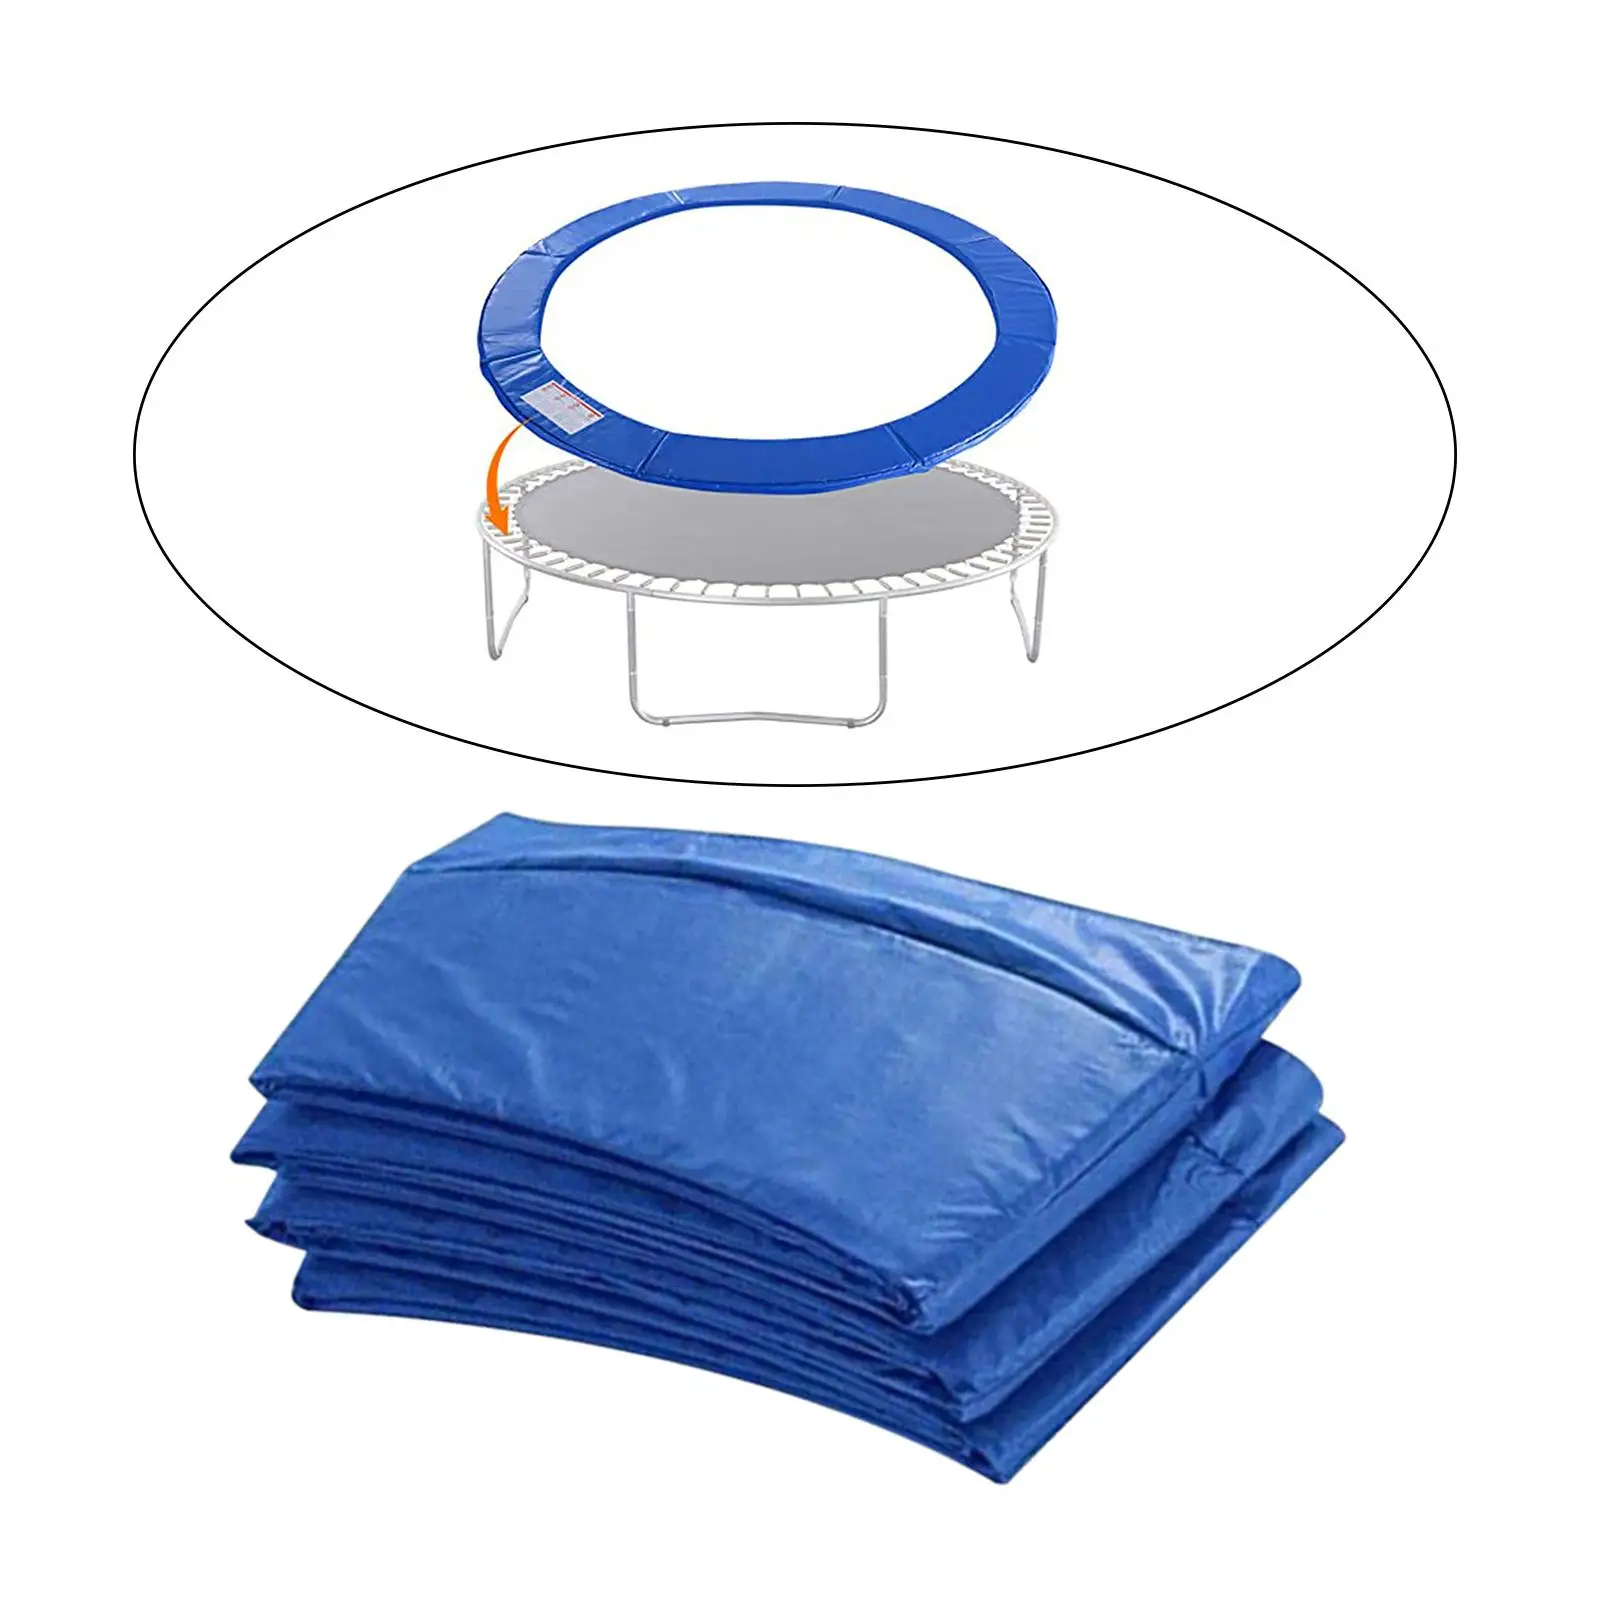 Trampoline Pad Trampoline Edge Cover Replace Jumping Bed Protective Cover Trampoline Accessories Side Guard Spring Cover